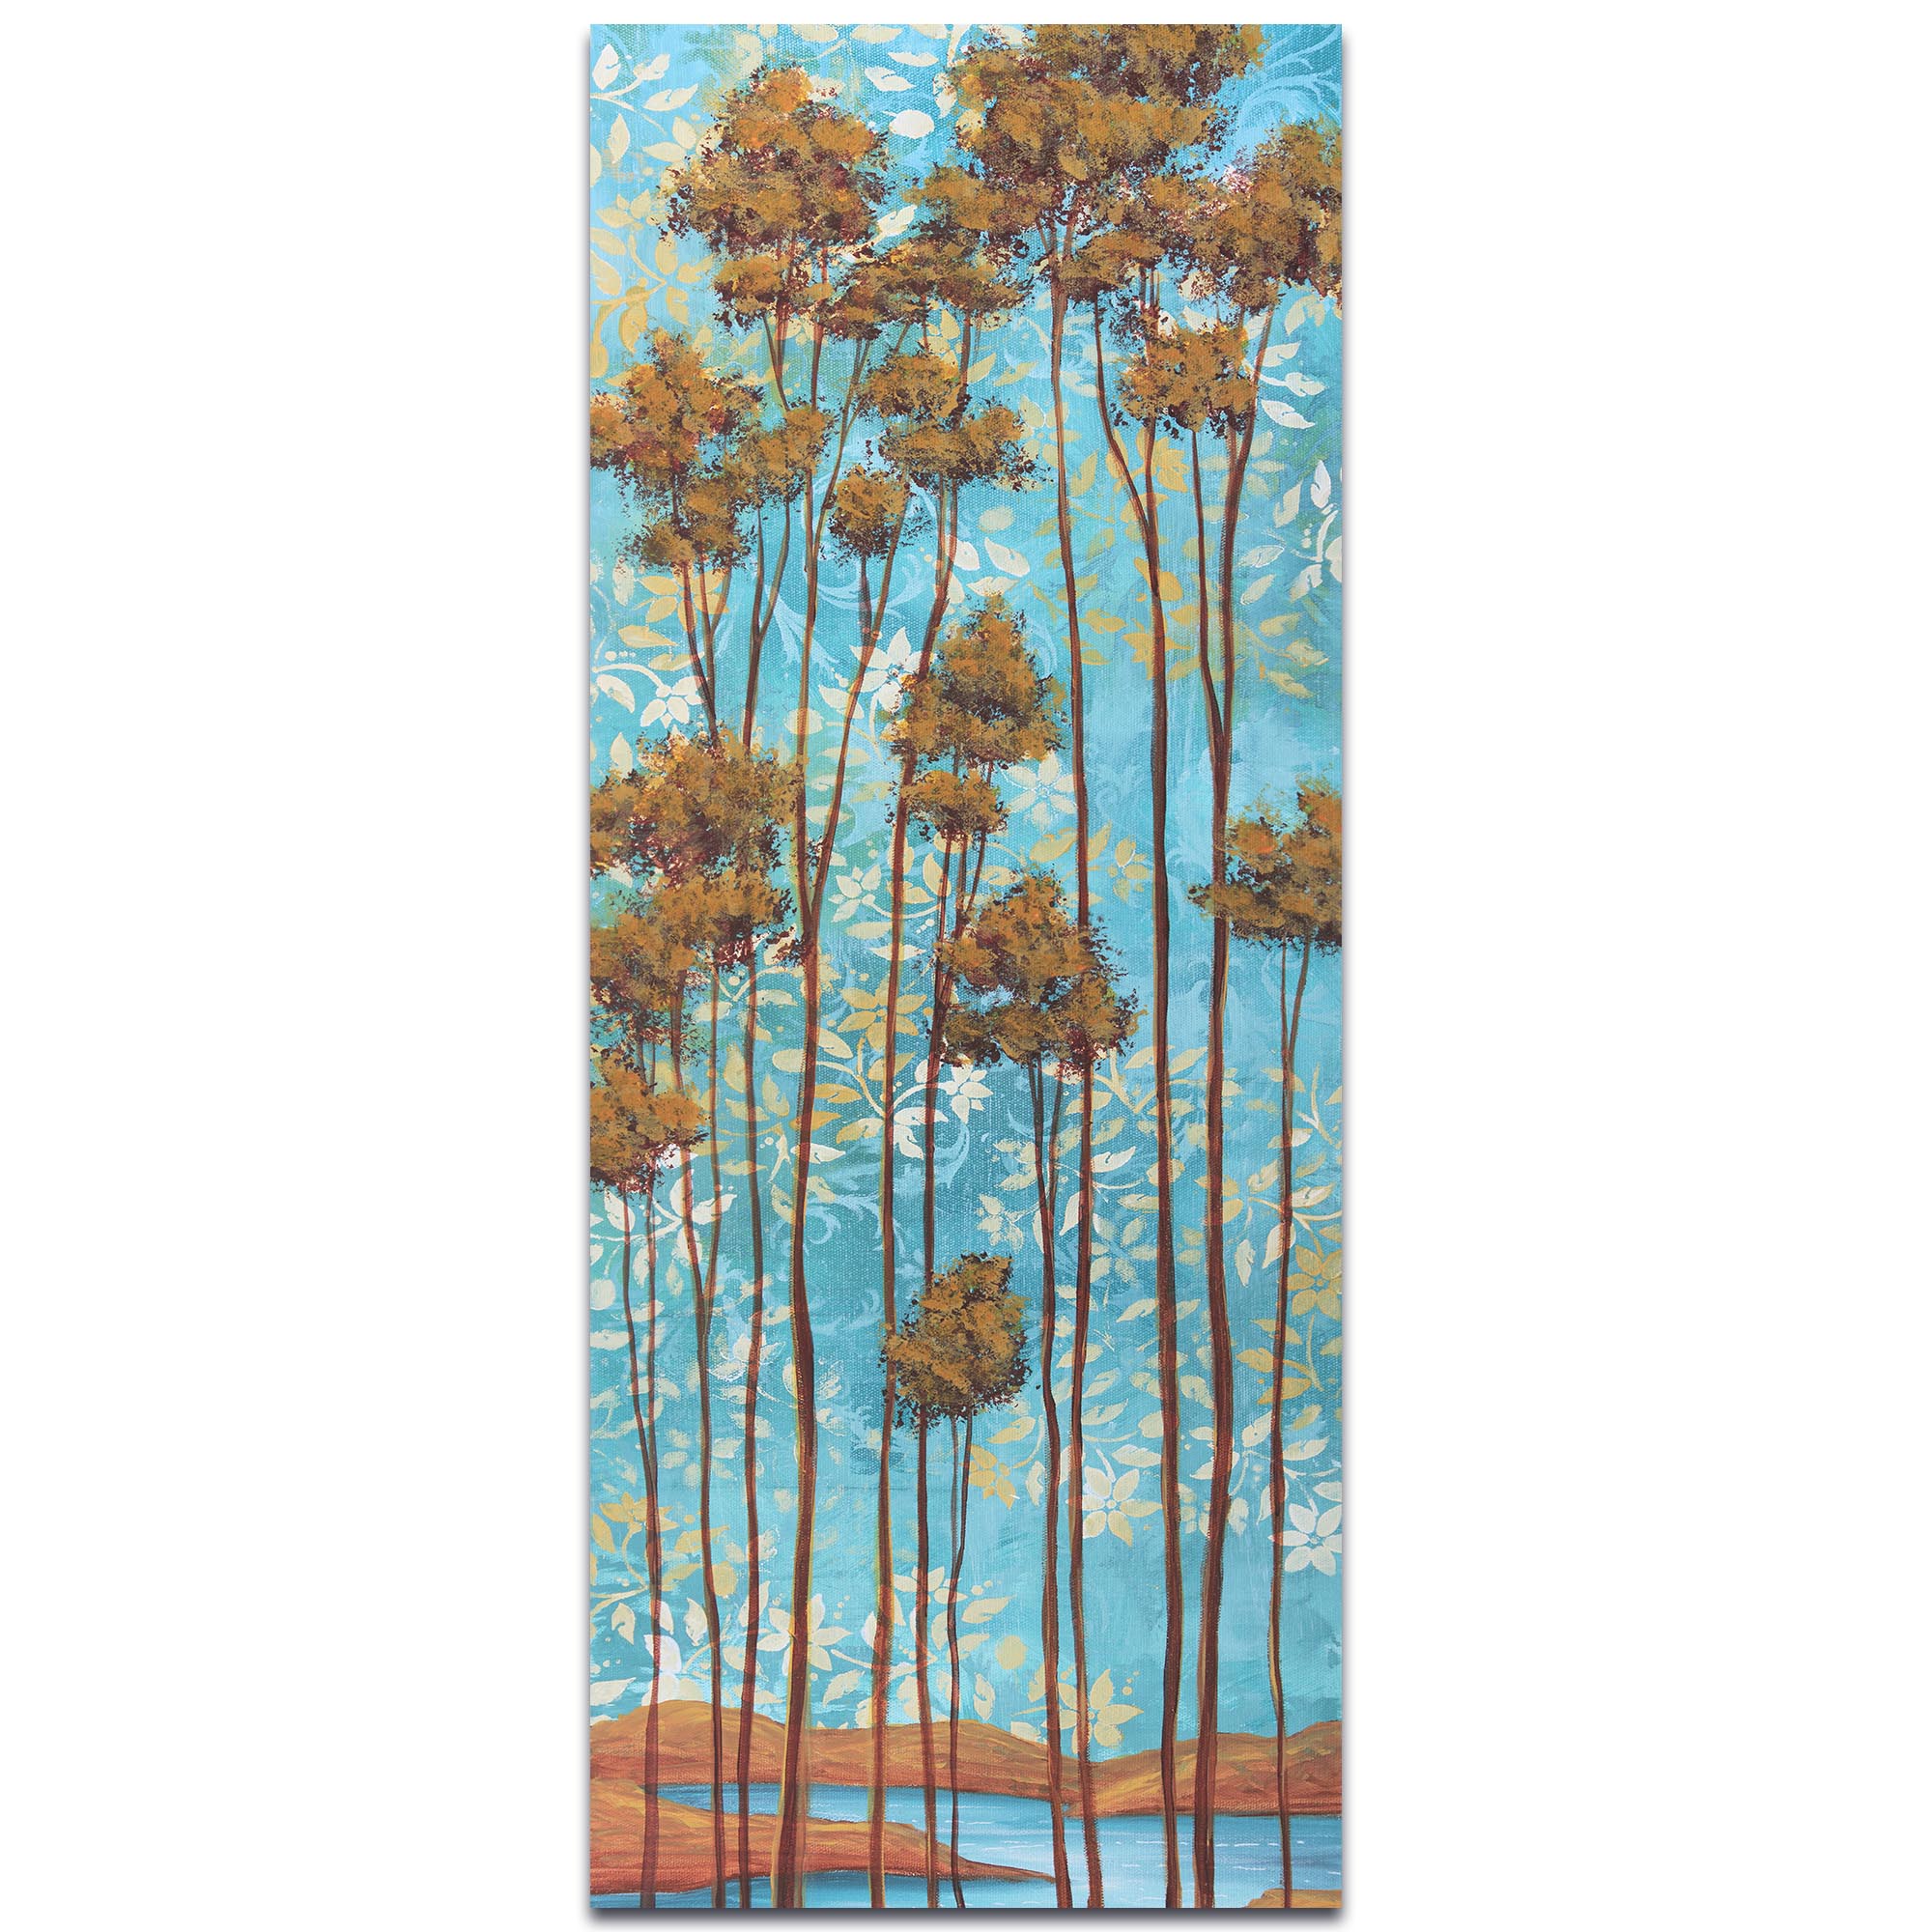 Abstract Tree Art 'Floating Dreams v2' - Landscape Painting on Metal or Acrylic